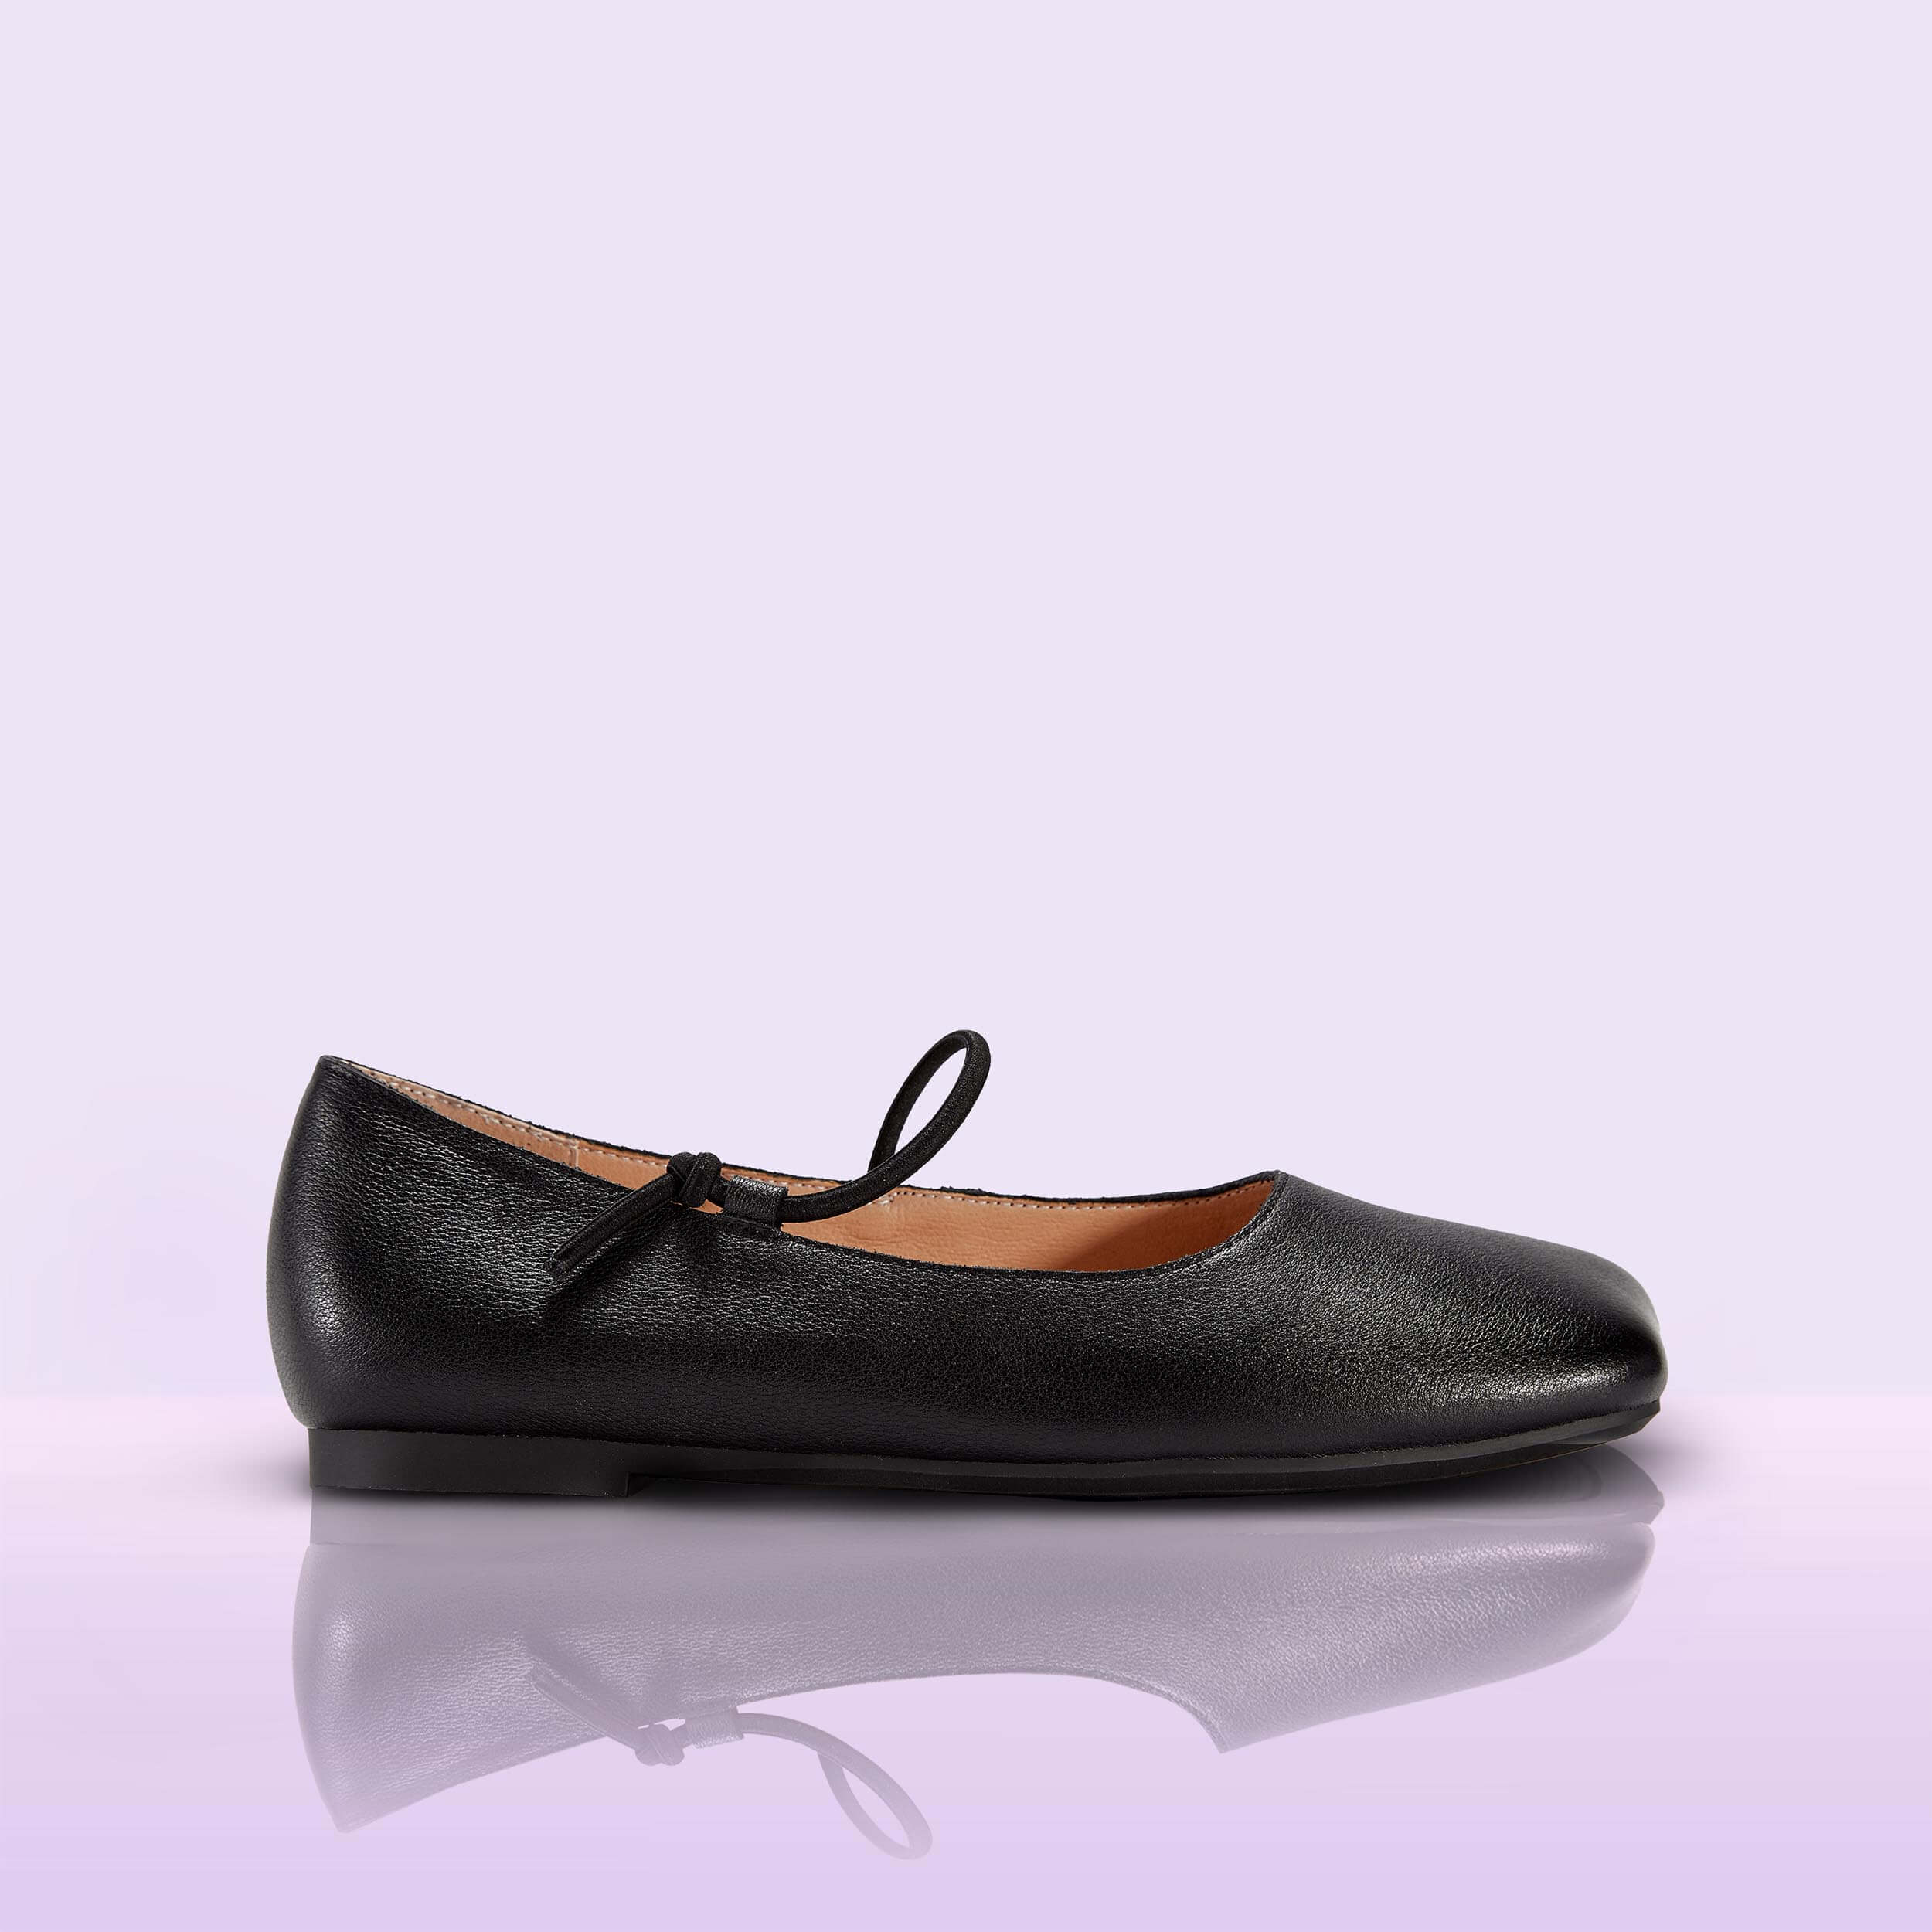 Buy Genuine Leather Square-Toe Formal Shoes online | Looksgud.in